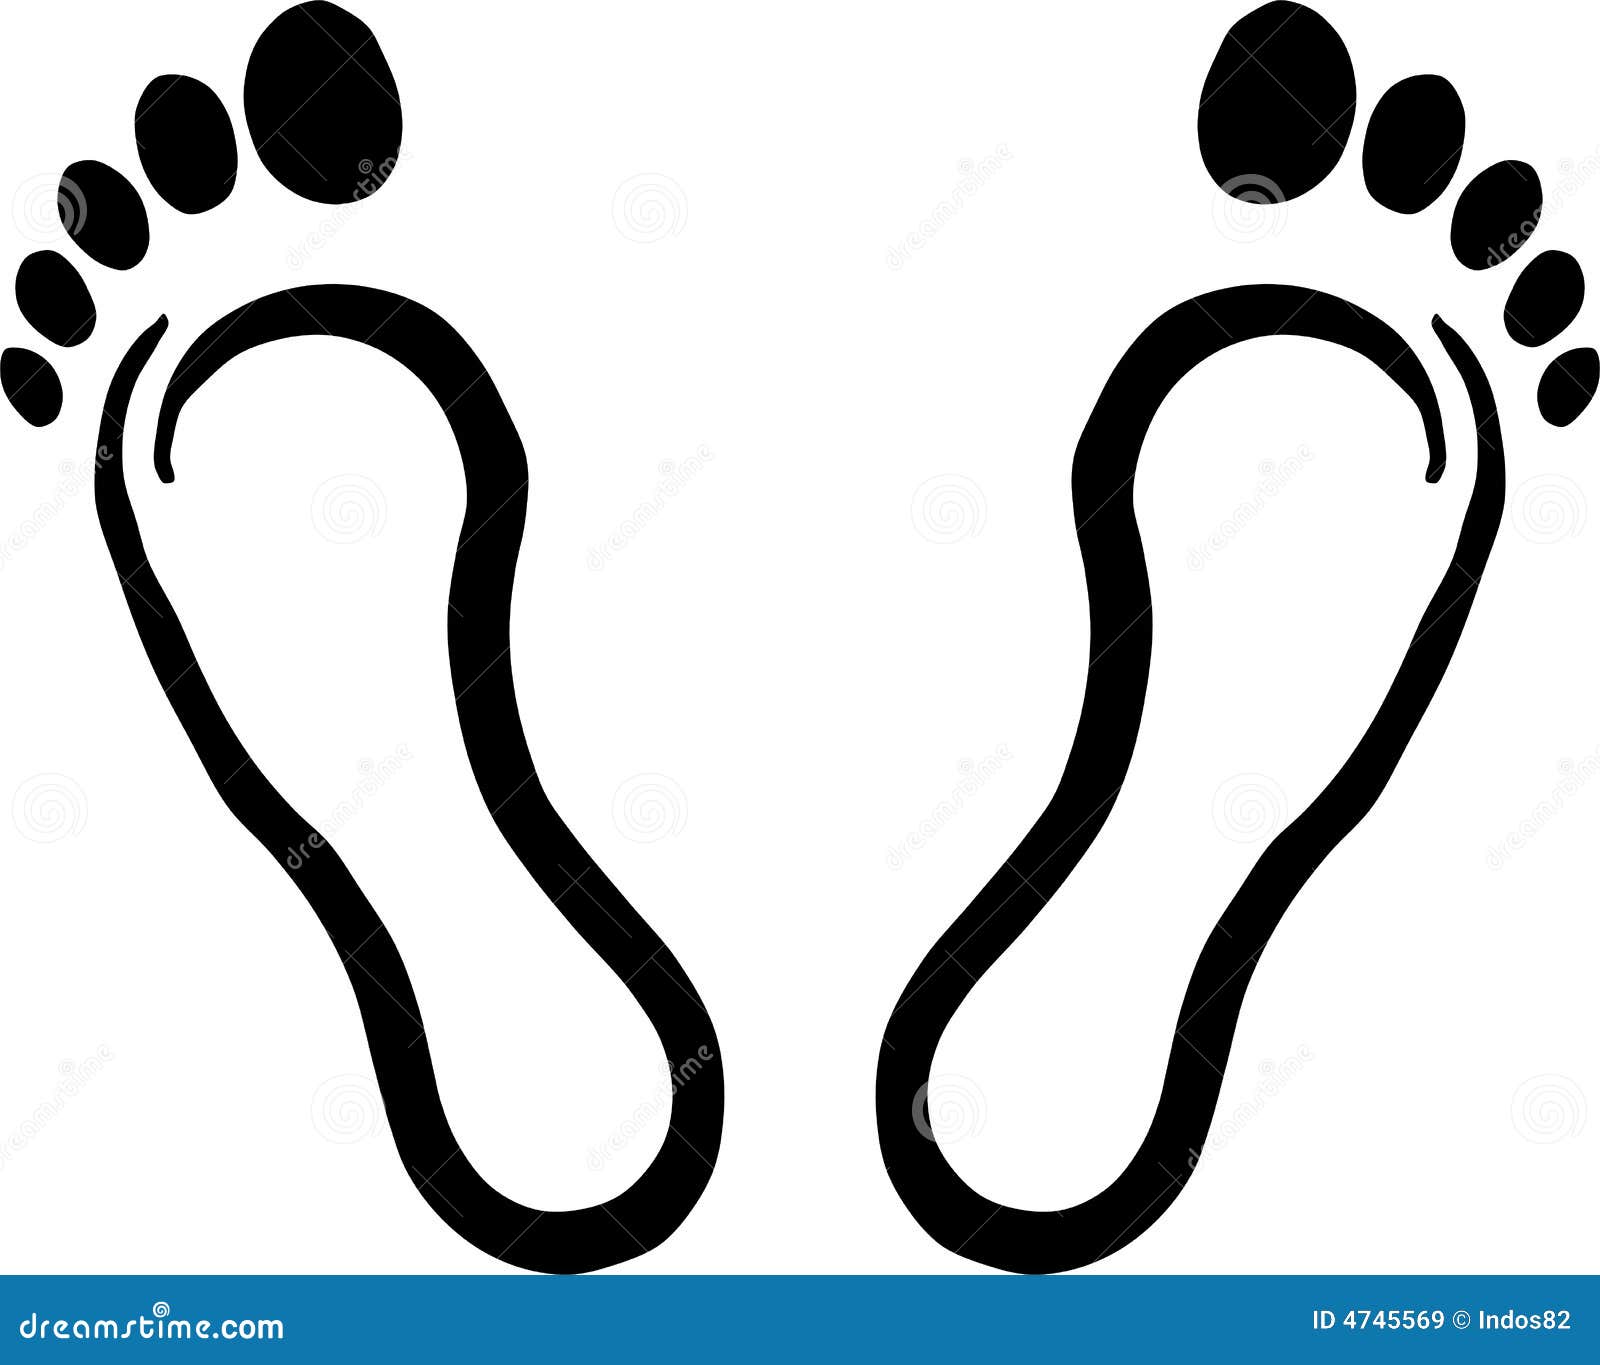 Foot prints stock vector. Illustration of silhouette, single - 4745569